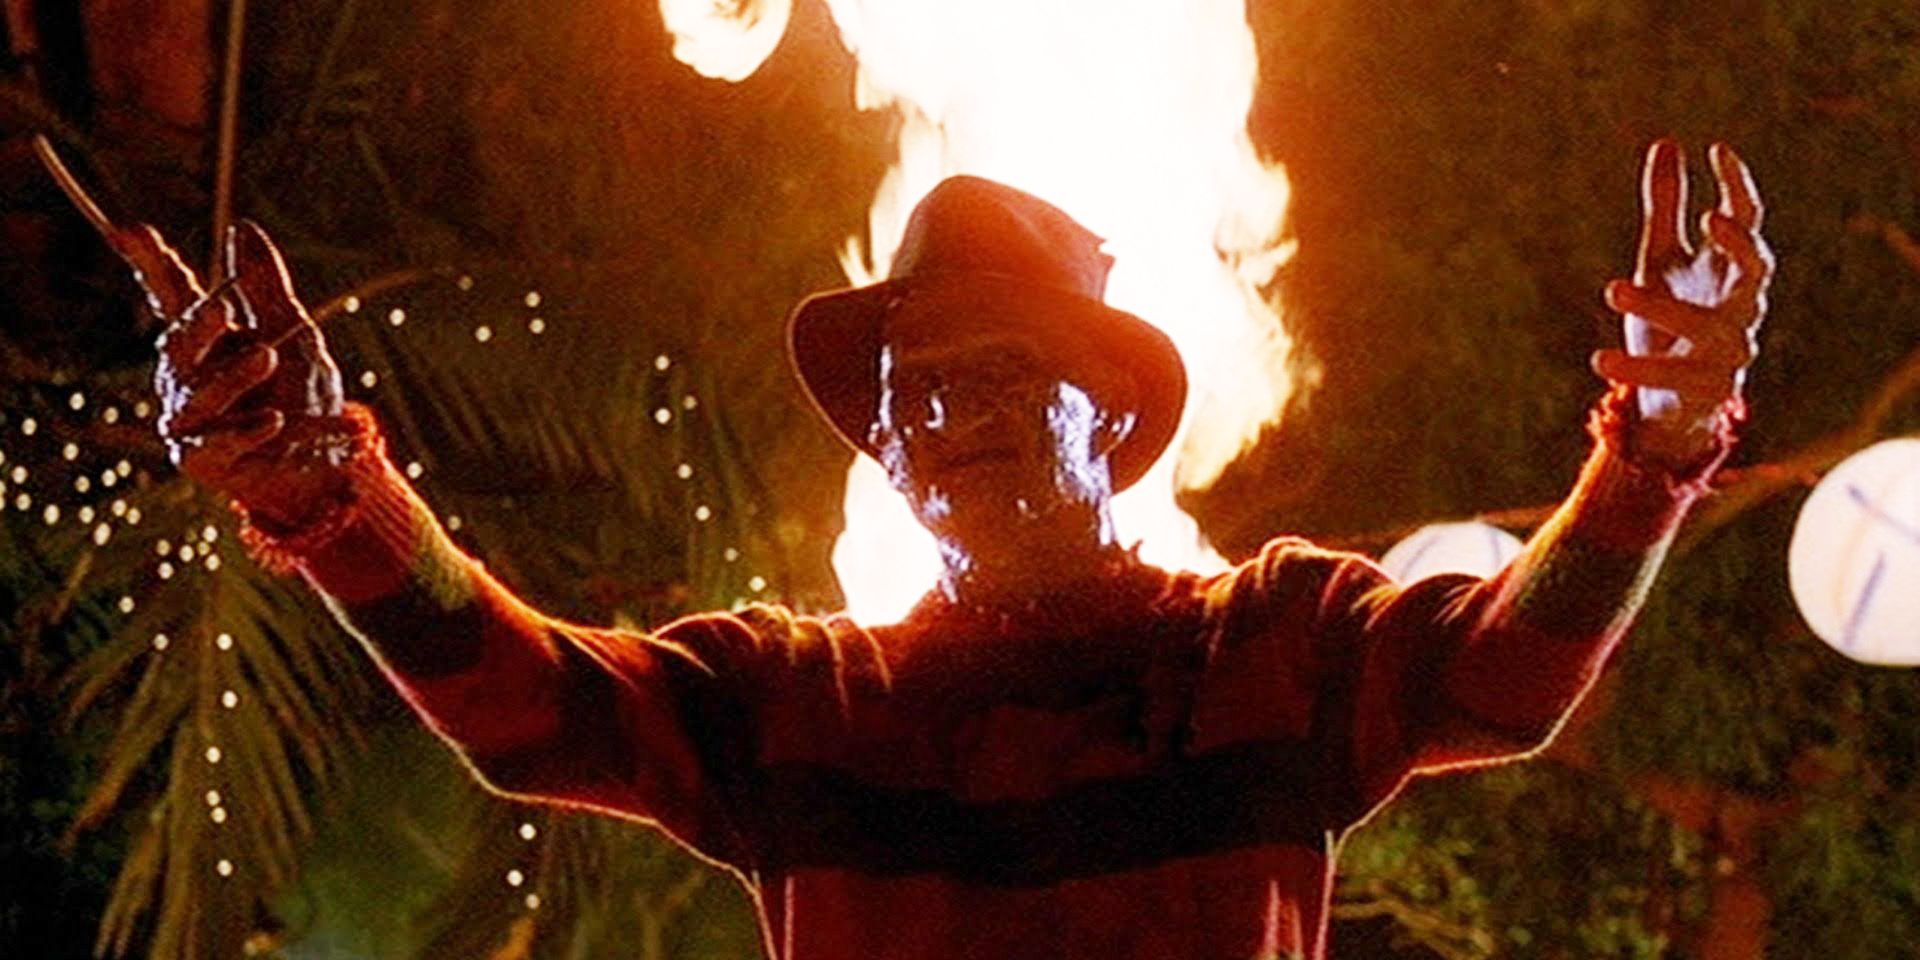 a-nightmare-on-elm-street-2-is-riddled-with-freddy-krueger-plot-holes